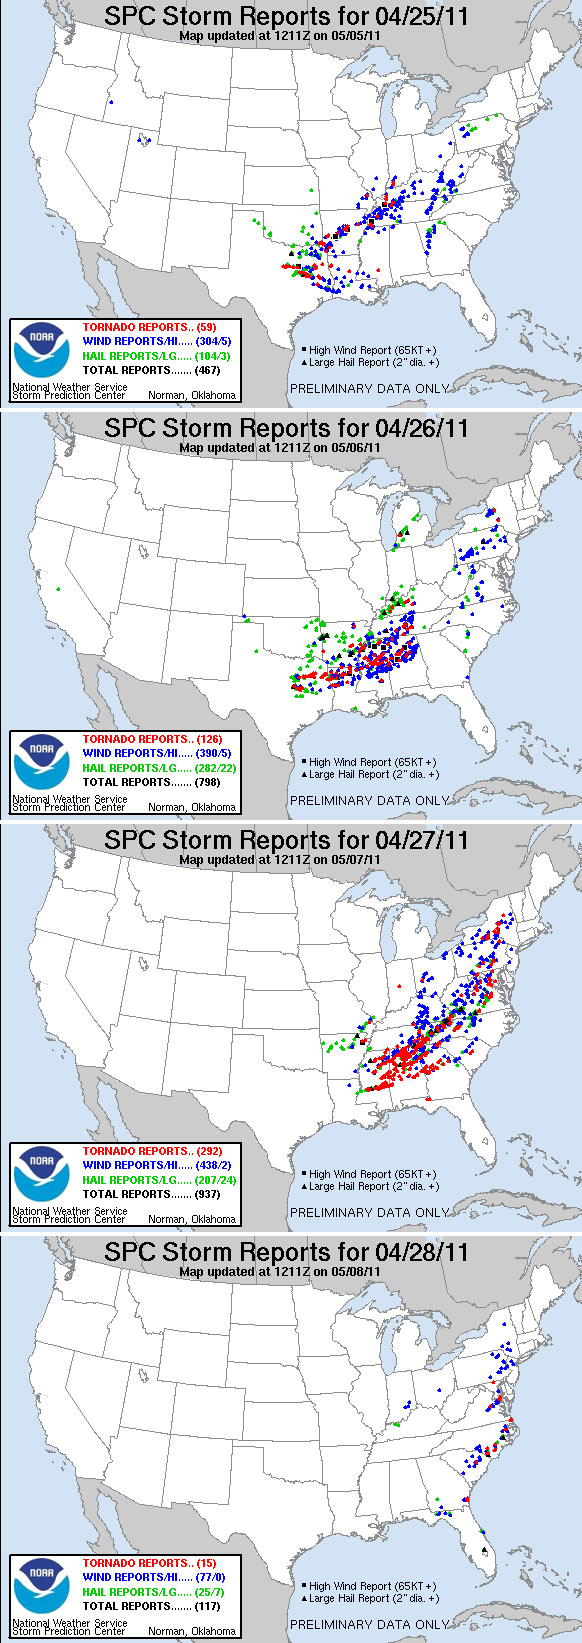 Severe storm reports from April 25, 2011 through April 28, 2011. There were 292 tornado reports alone on April 27. And on that day, 316 people were killed. 